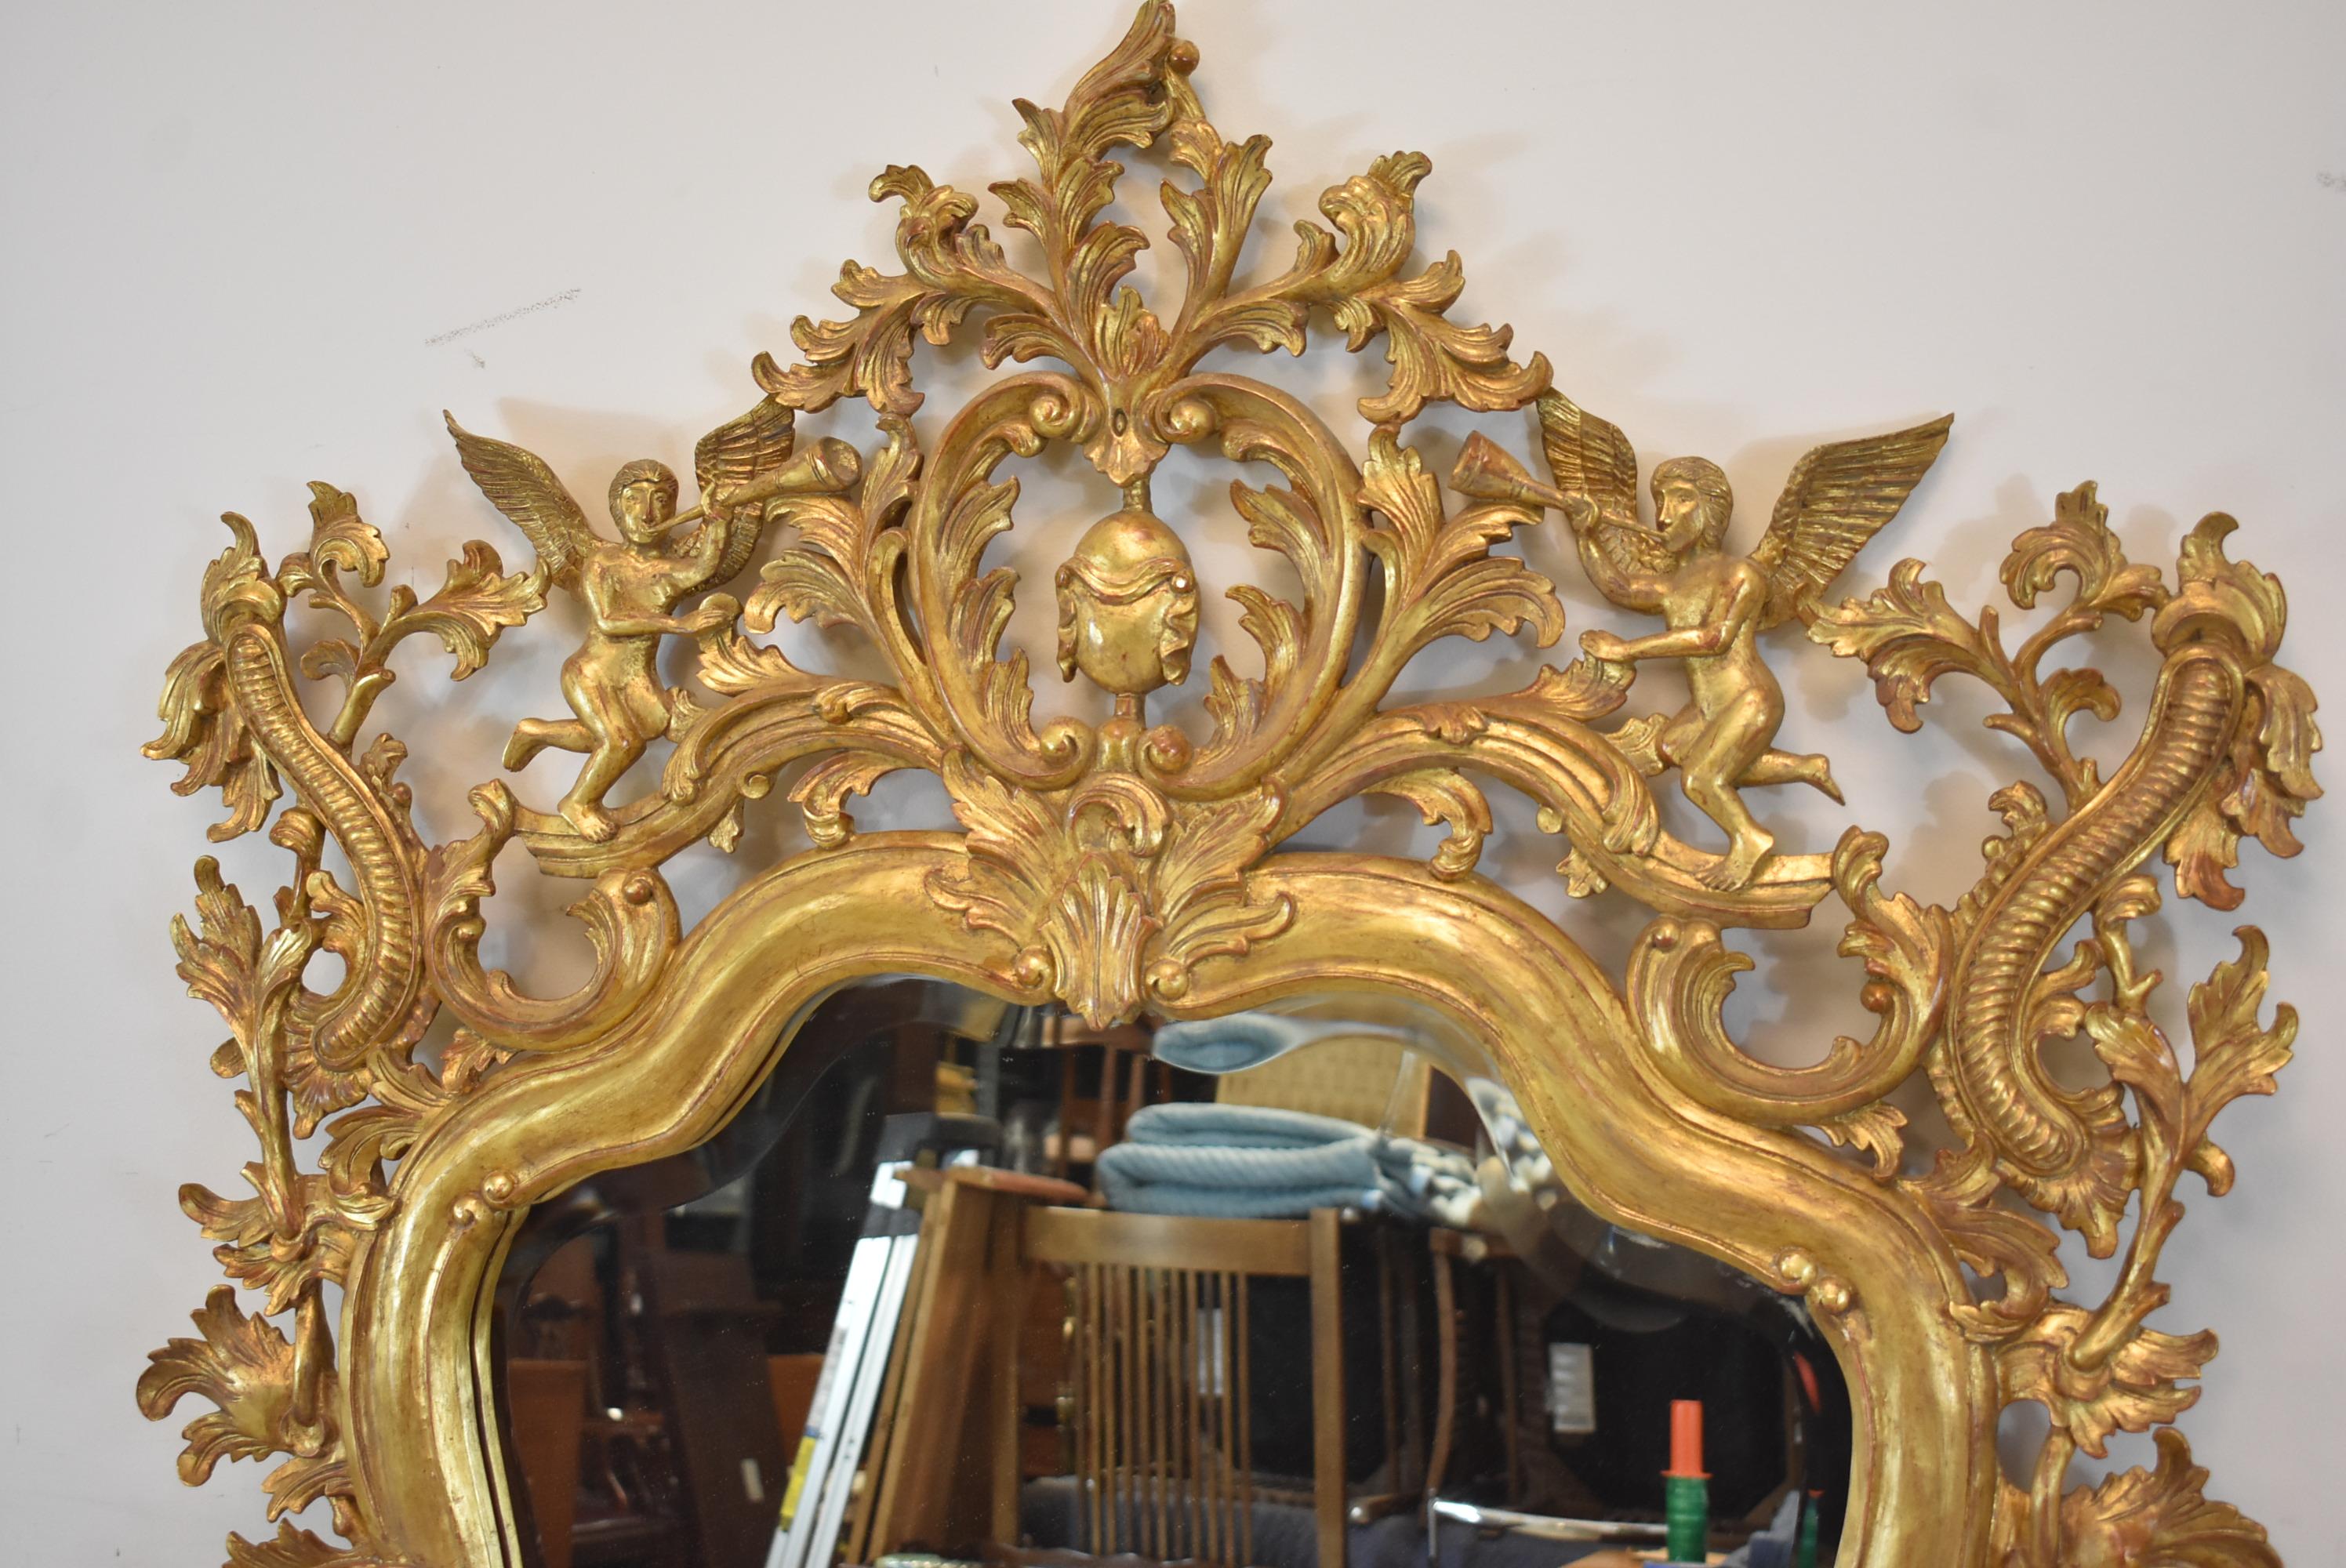 Elaborately carved wood gold gilt Italian framed beveled mirror. Adorned with trumpeting angels and stringed musical instruments. Very nice condition. Dimensions: 3